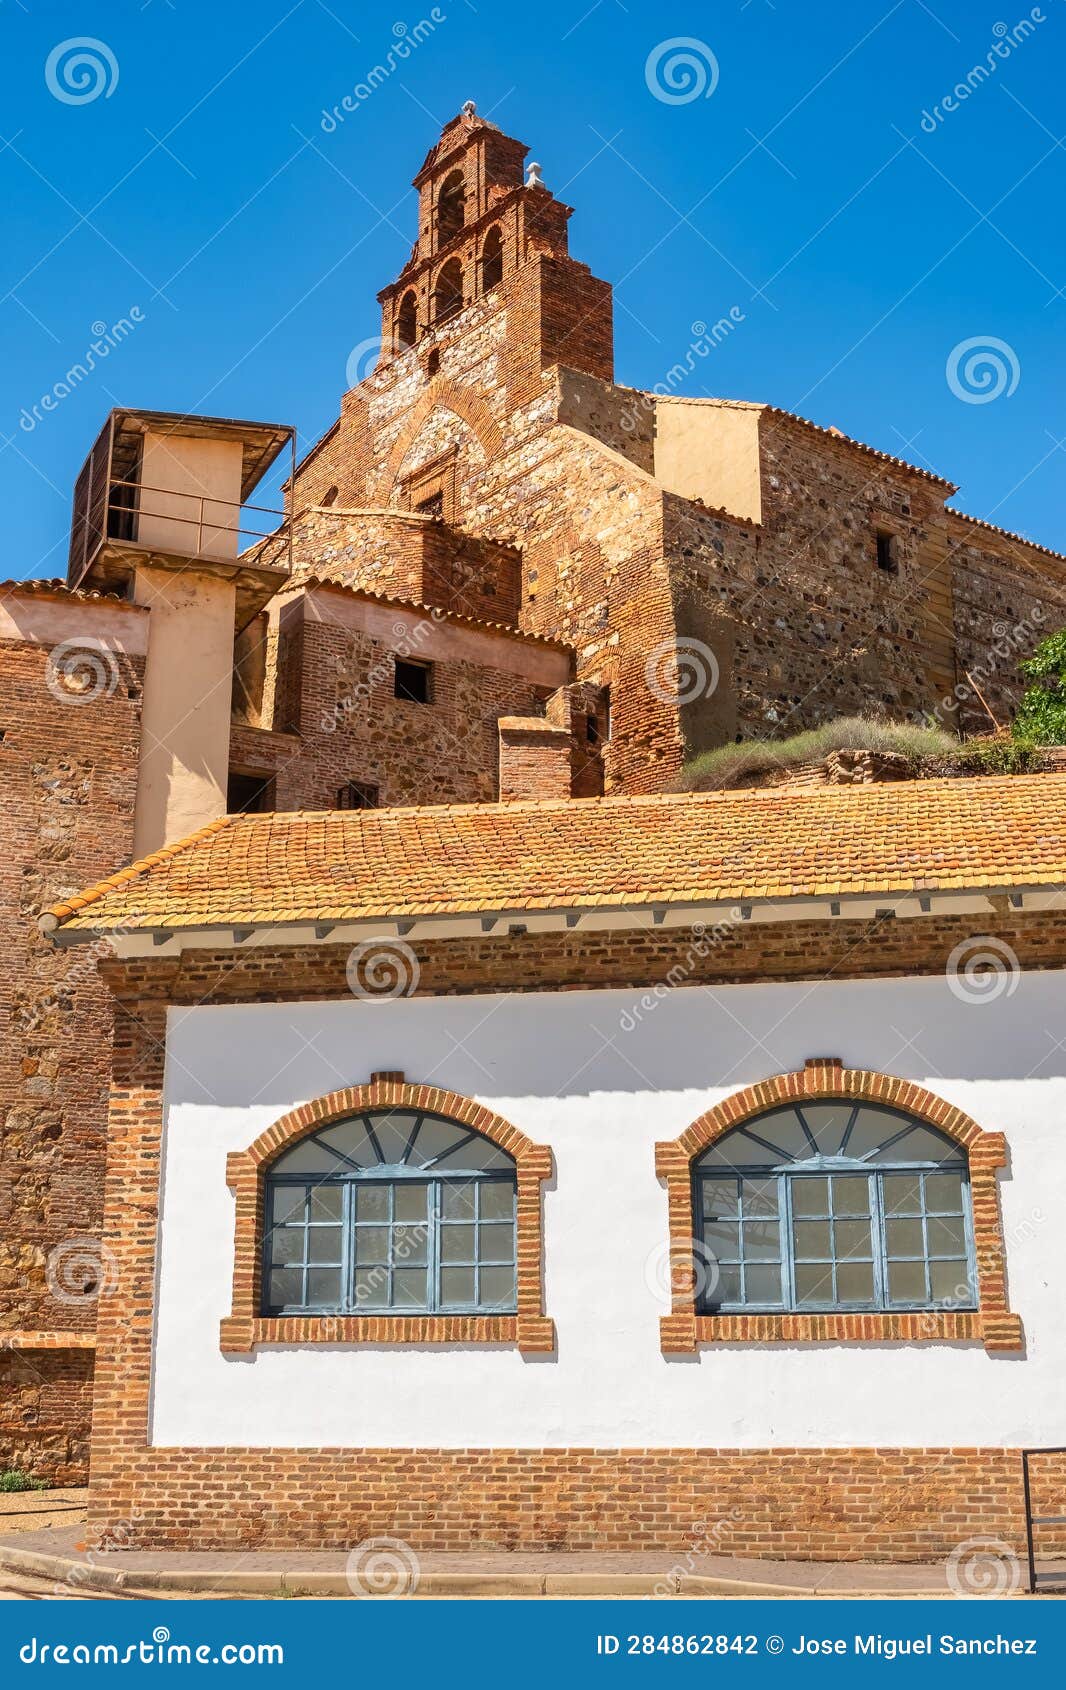 church tower and old buildings in the closed mine of almacen, ciudad real, spain.